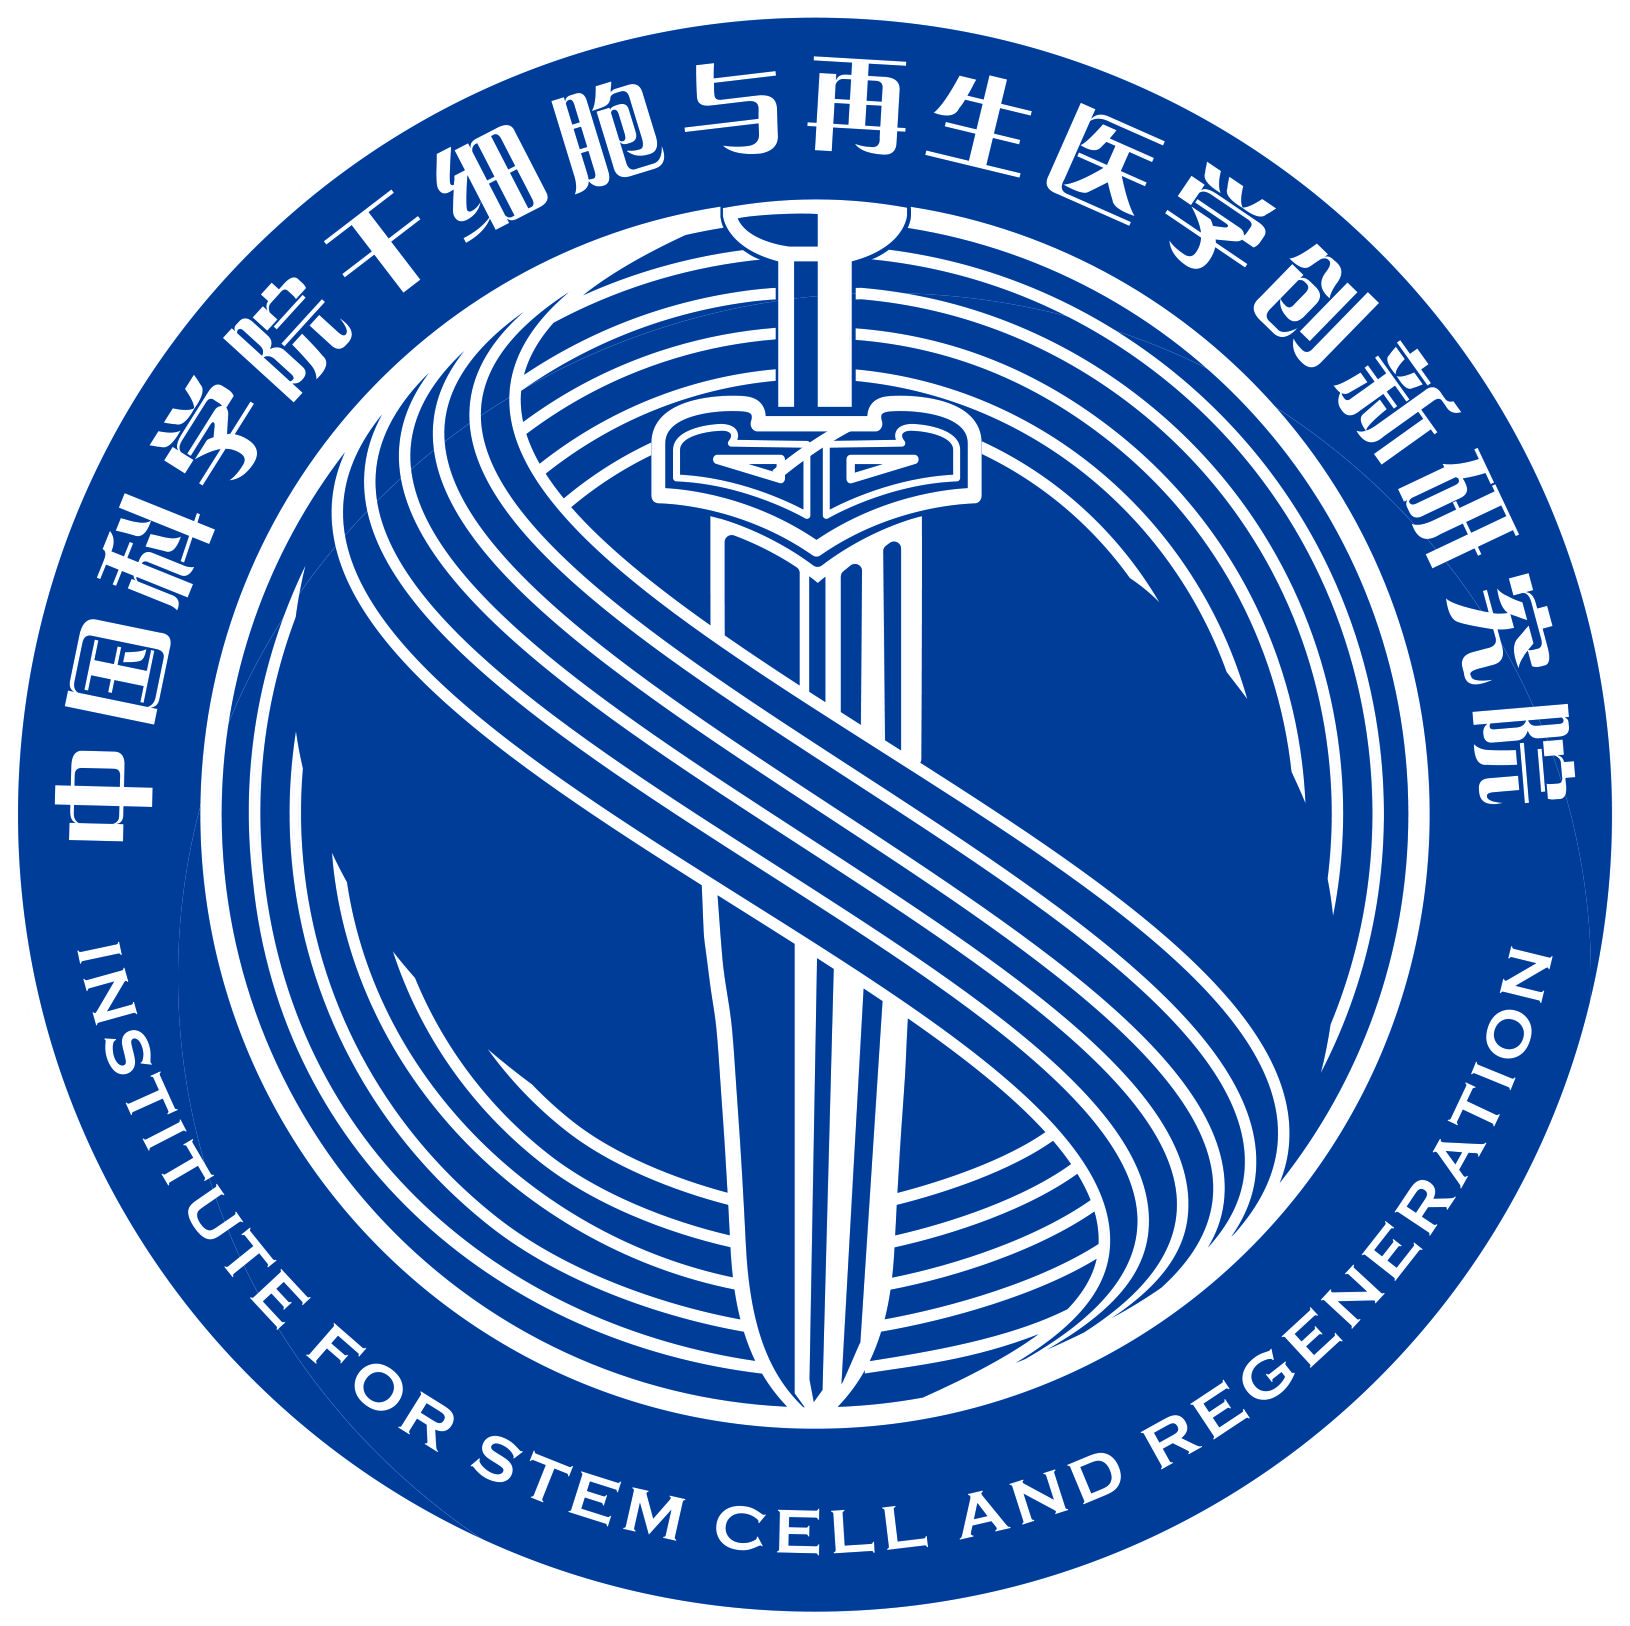 Institute for stem cell and regeneration